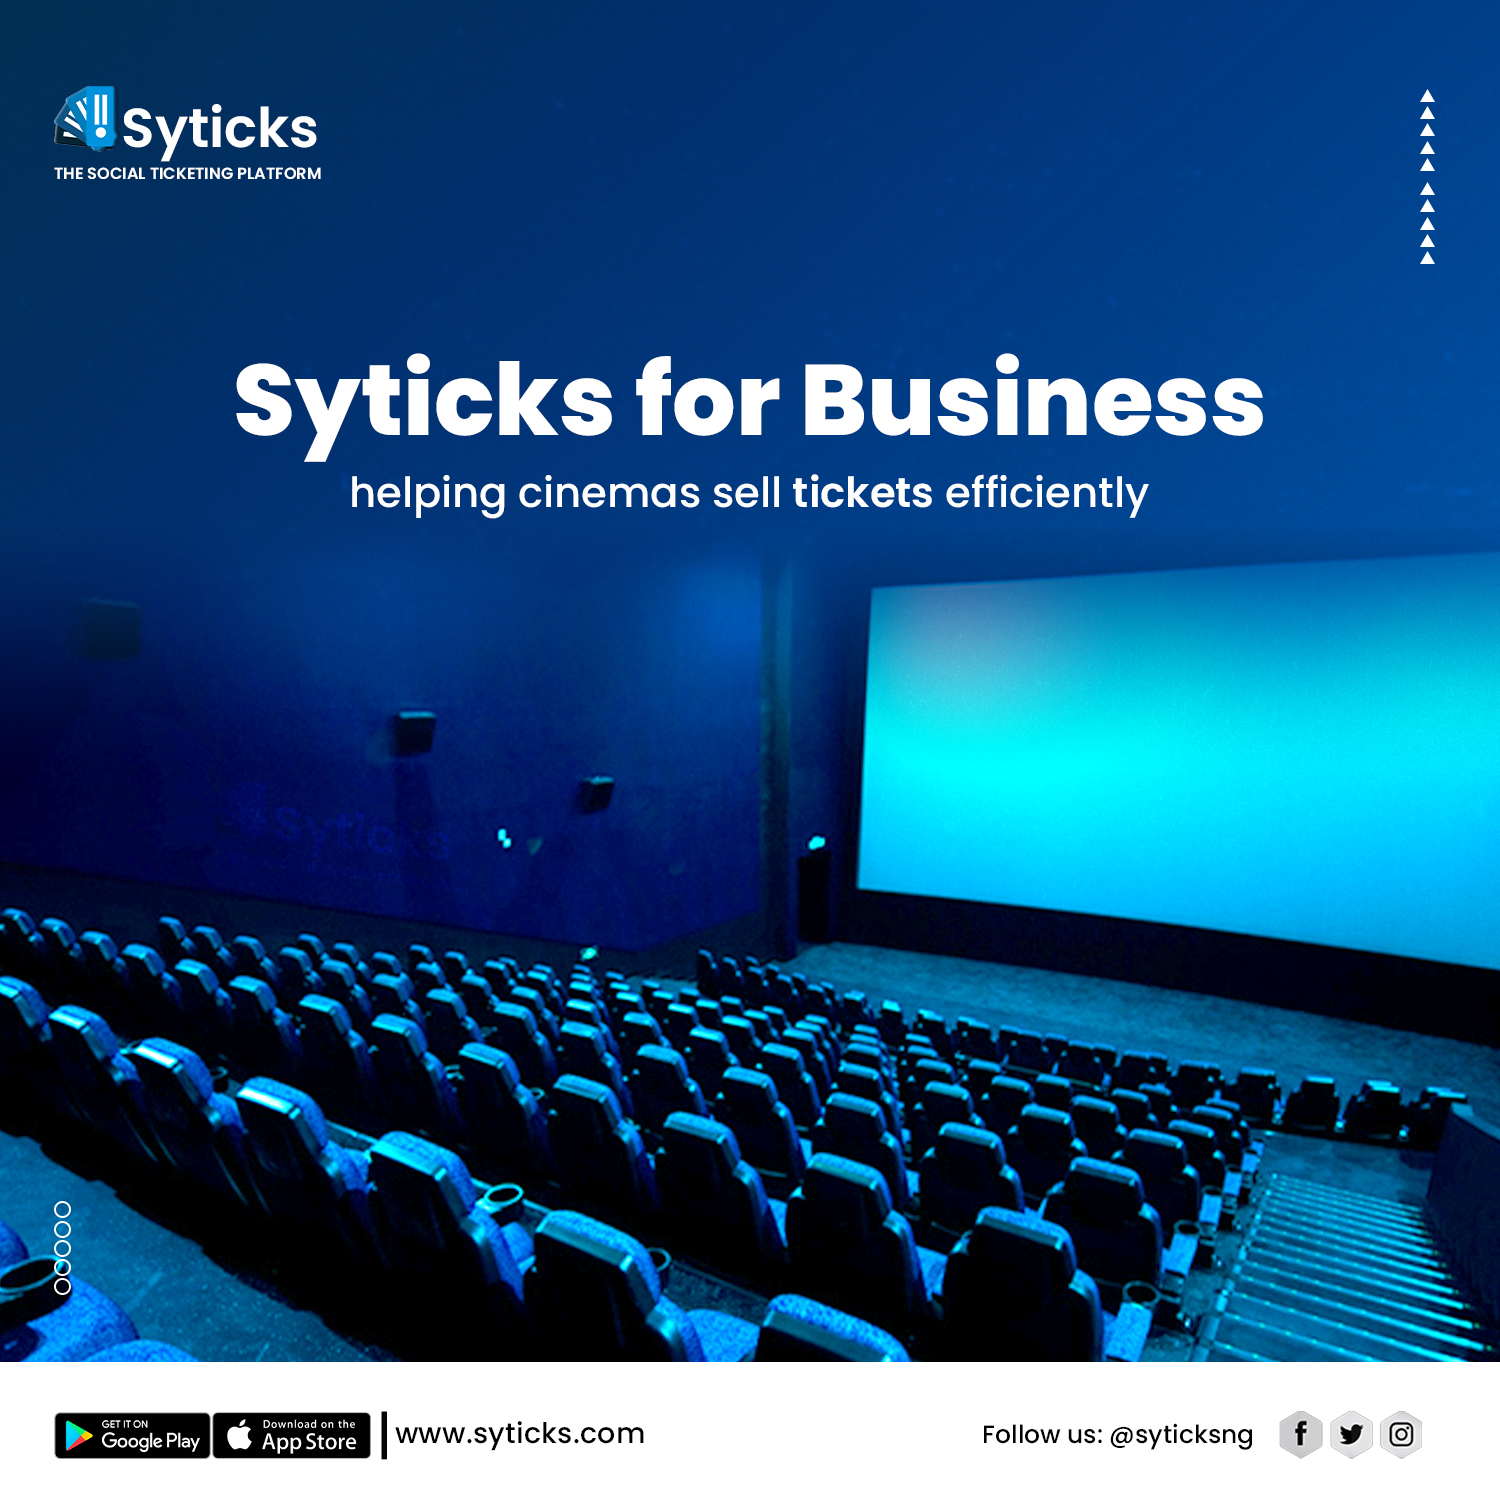 Syticks for business, helping cinemas sell tickets efficiently